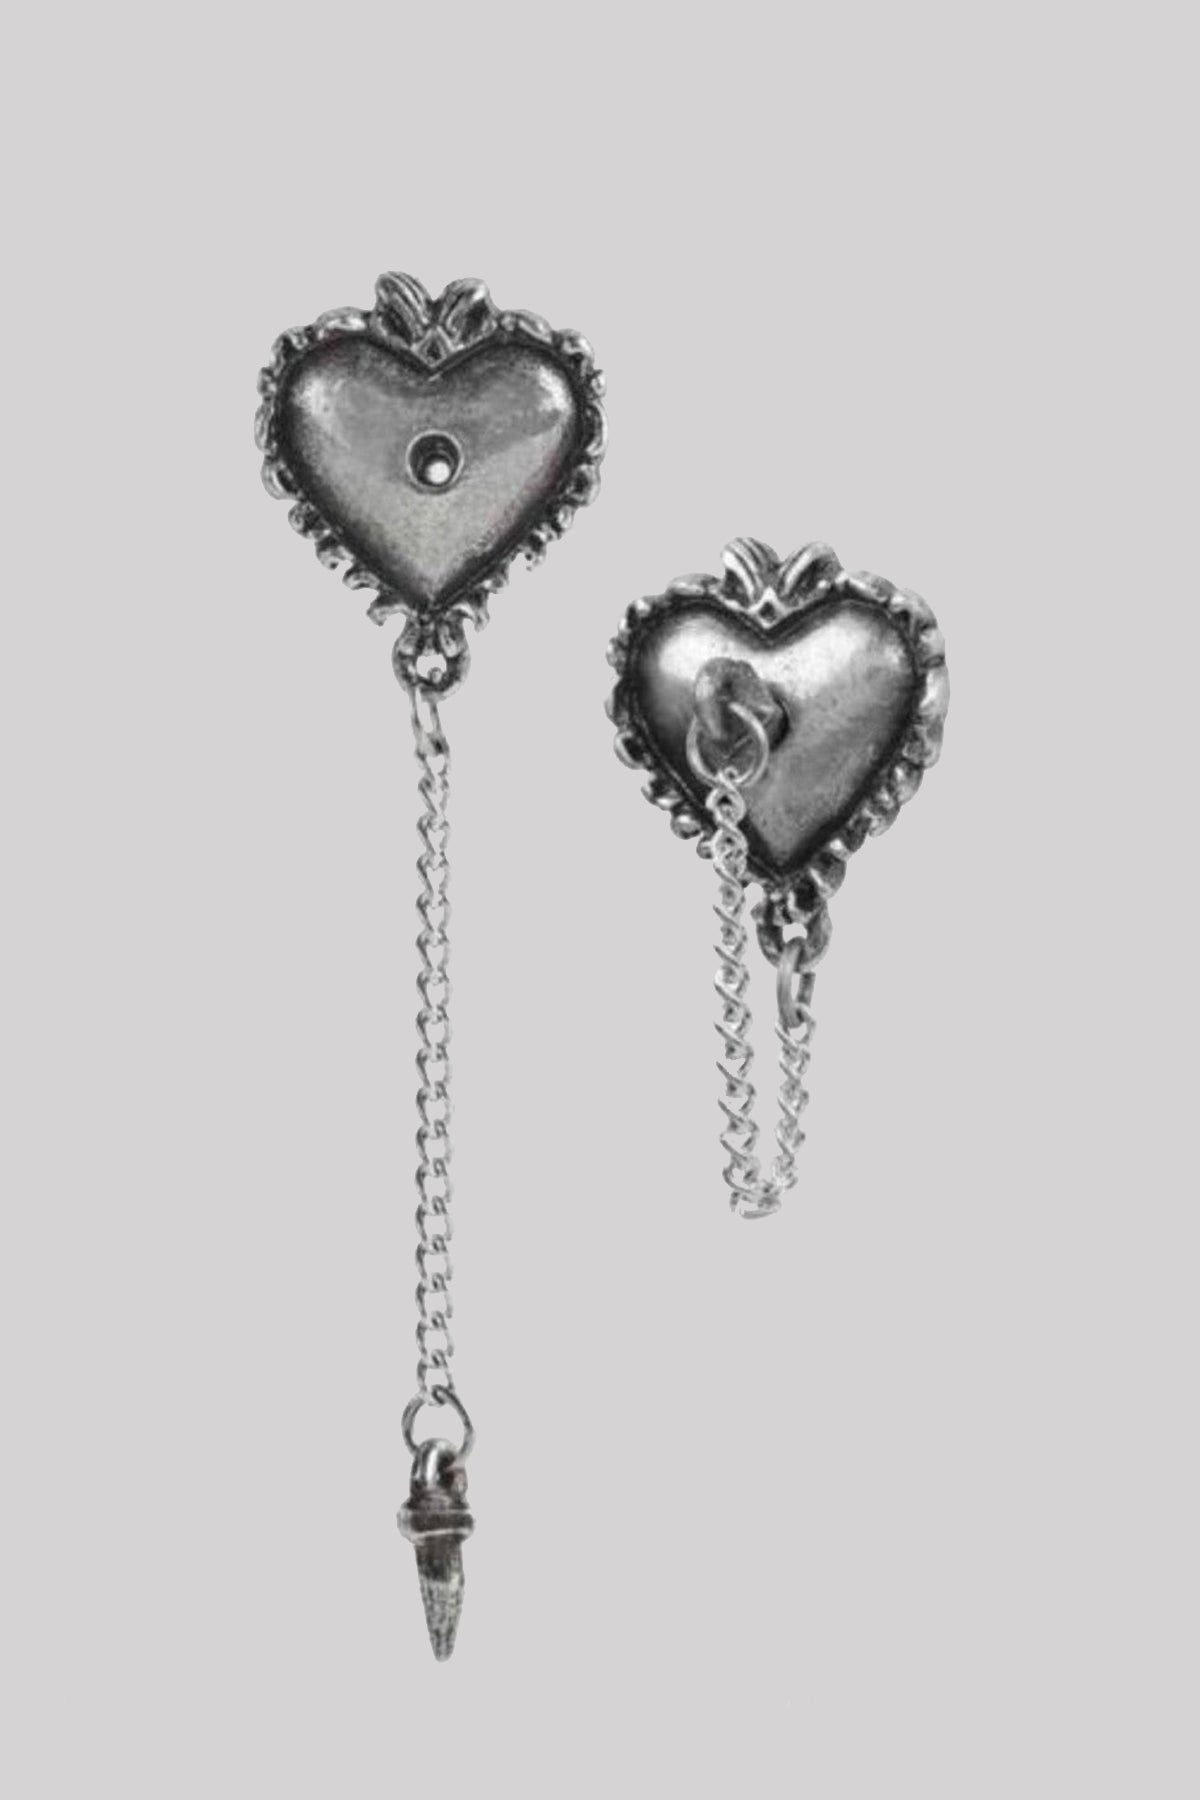 Alchemy England Witches Heart Gothic Earrings Jewellery